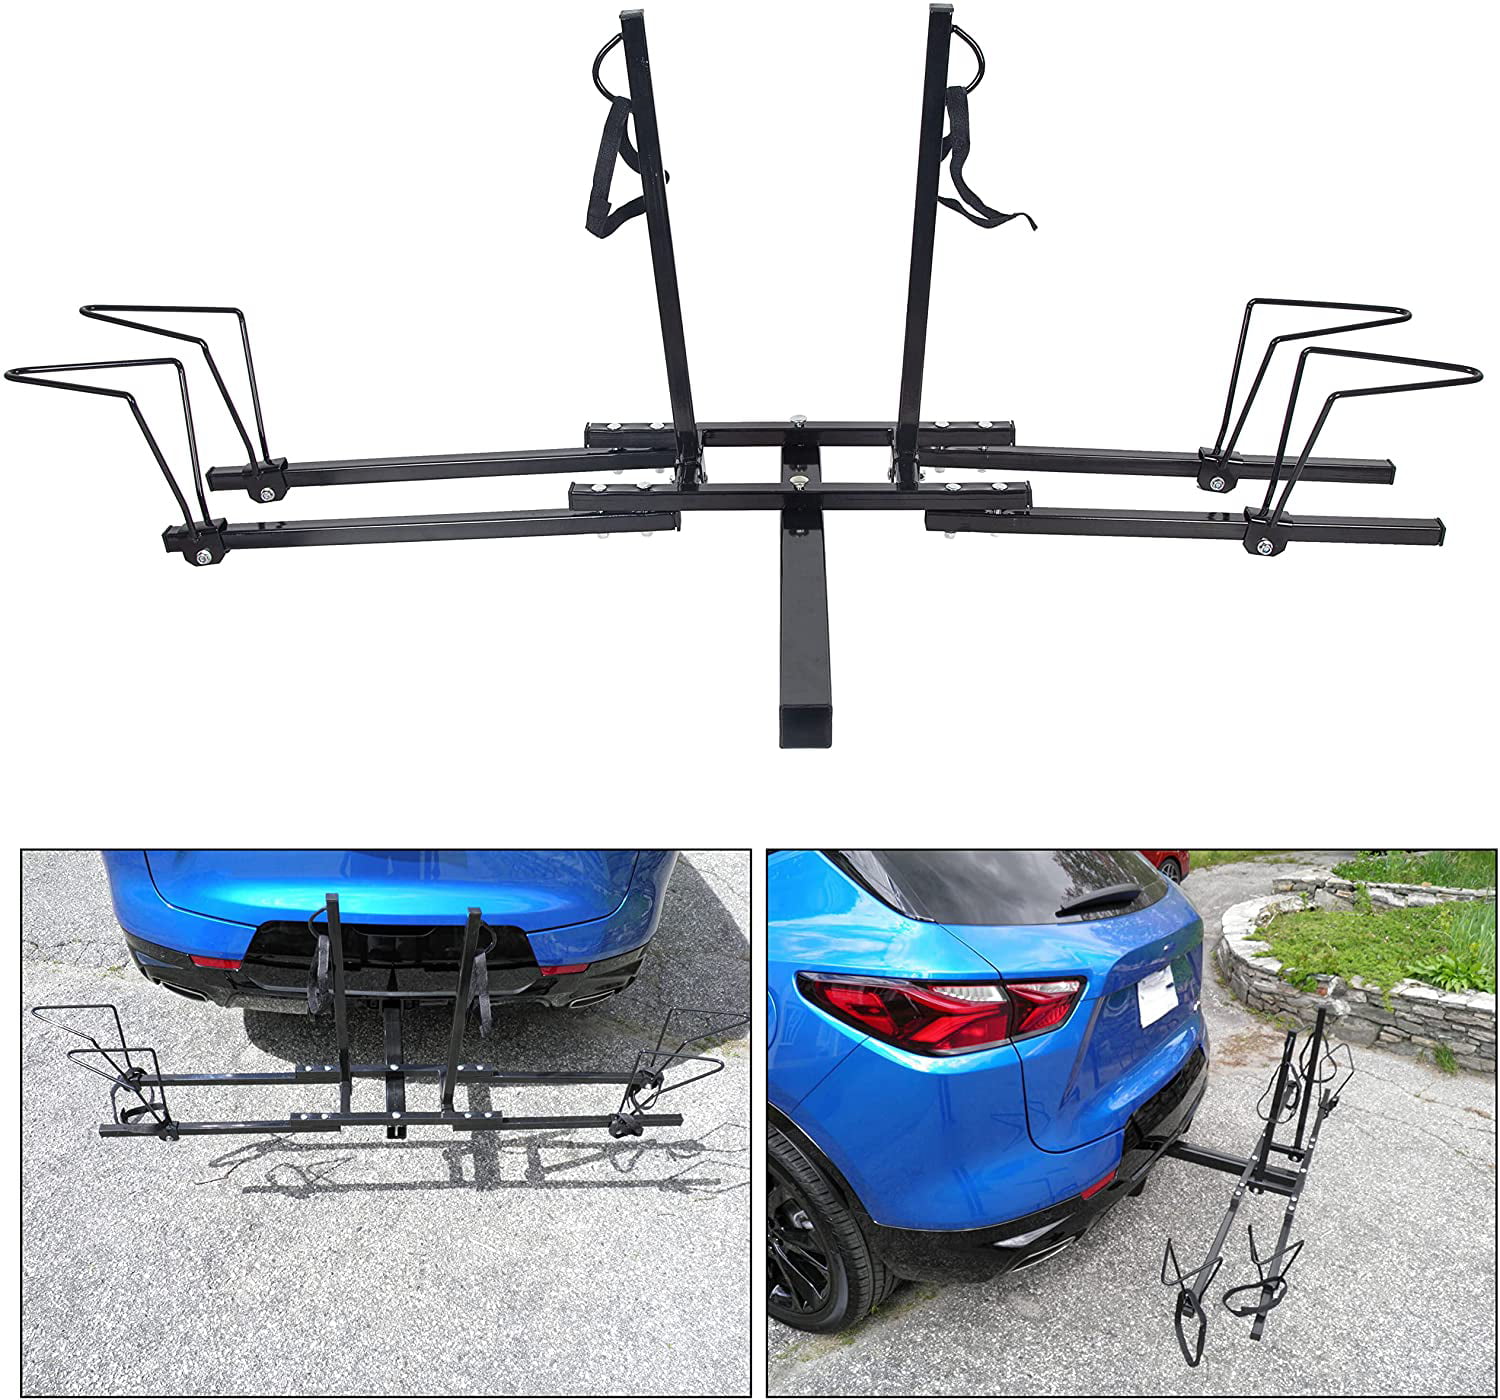 Bike Rack 2 Bicycle Hitch Mount Carrier Car Truck Auto 2 Bikes New SUV Rack BC02 